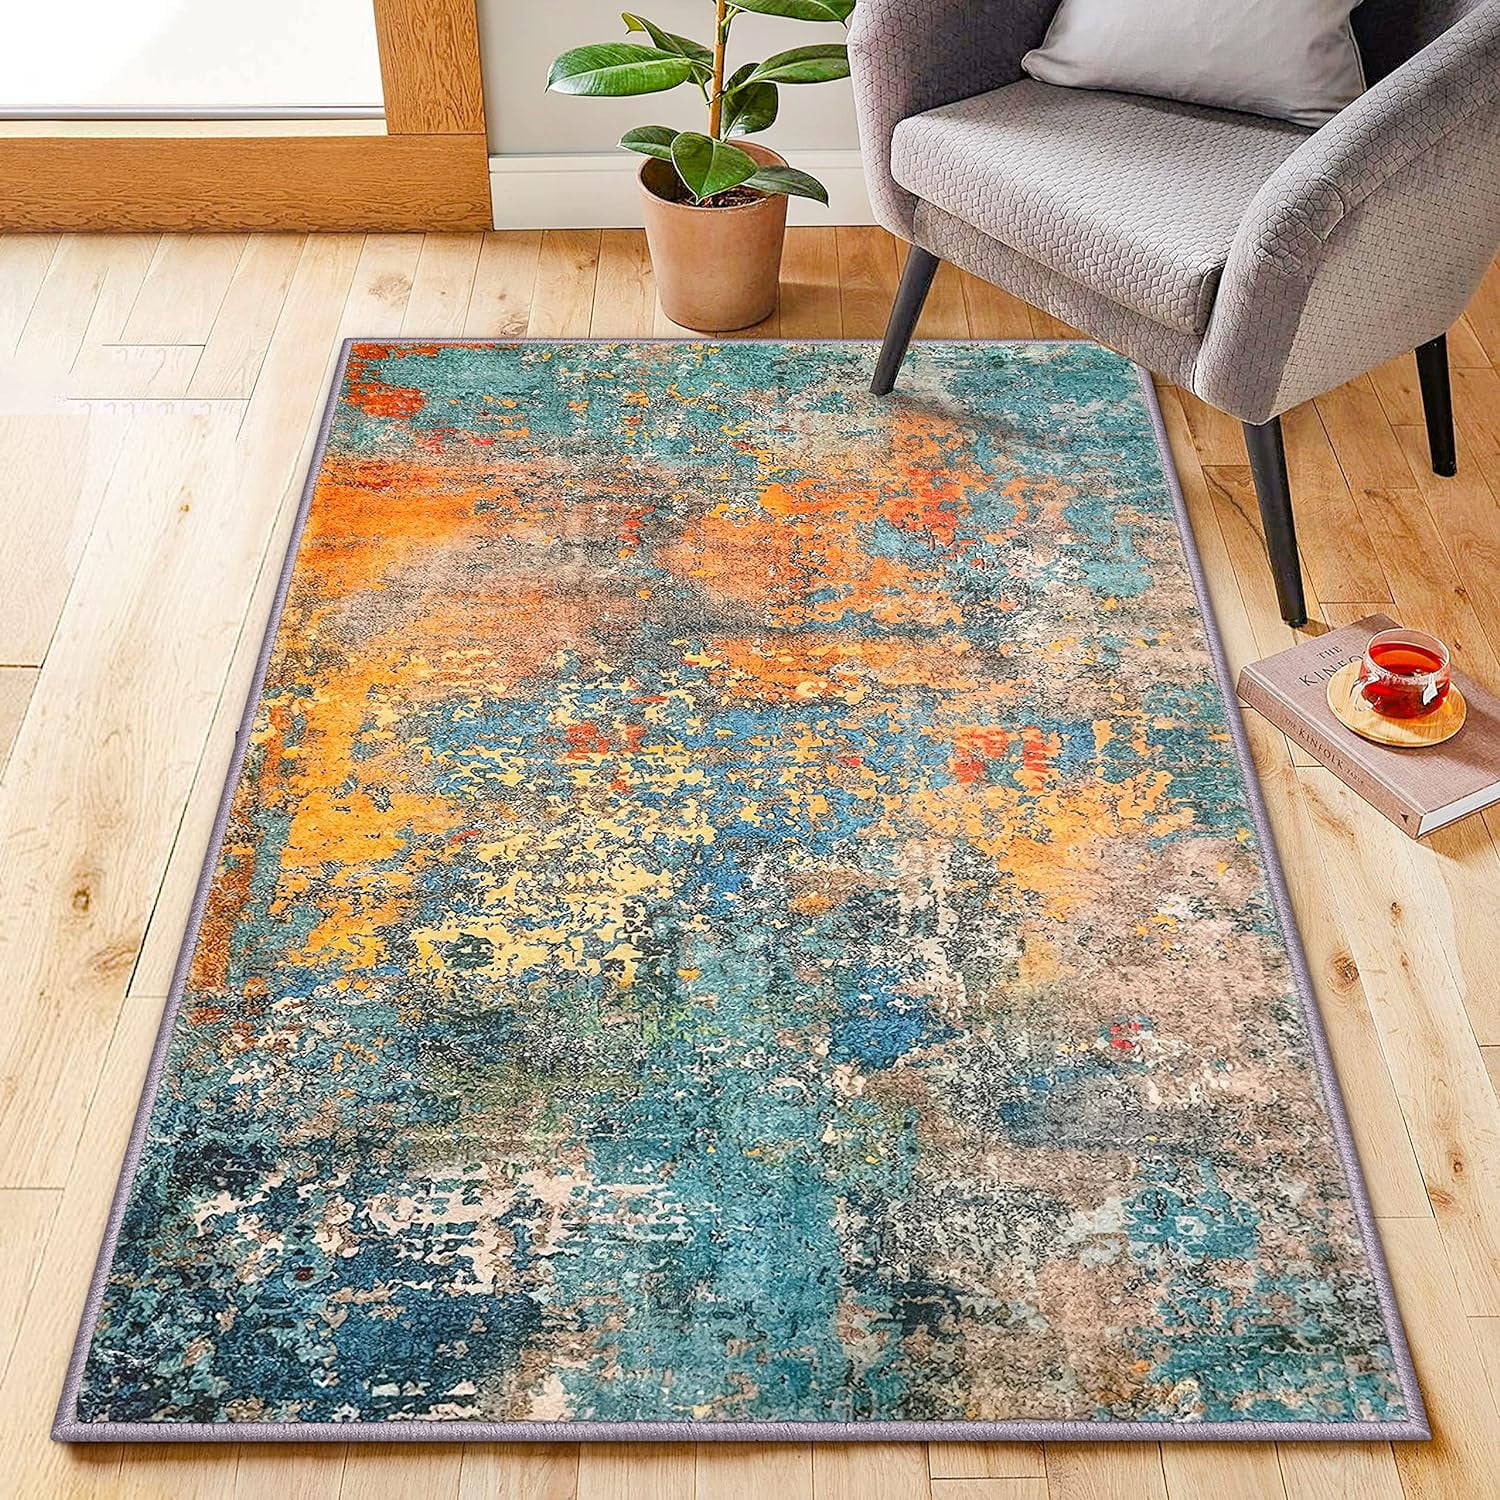 YoKii Vintage Abstract Area Rug 3x5 Faux Wool Hippie Aesthetic